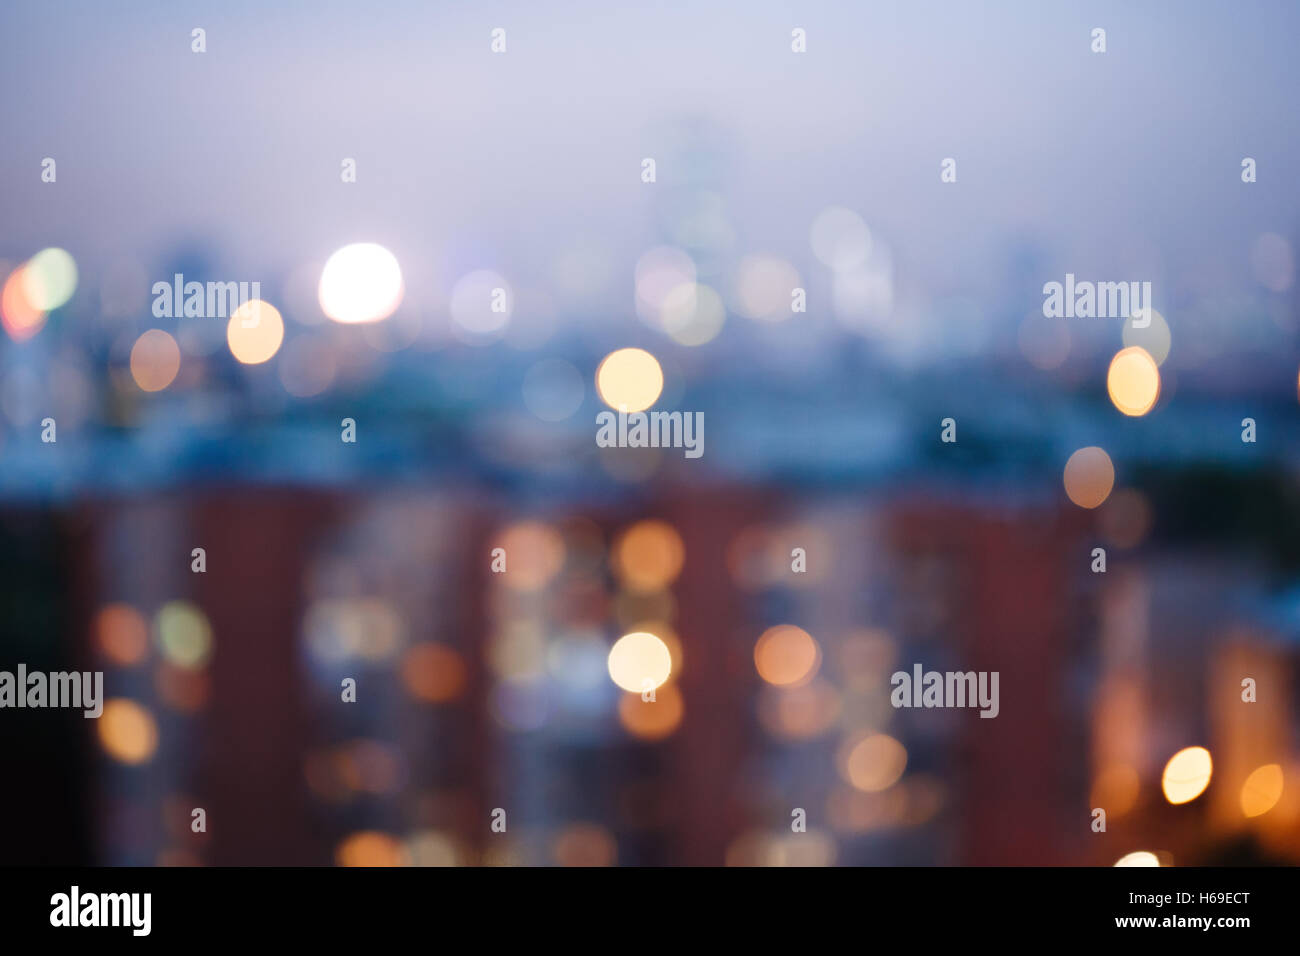 Abstract blurred city lights background, twilight time Stock Photo